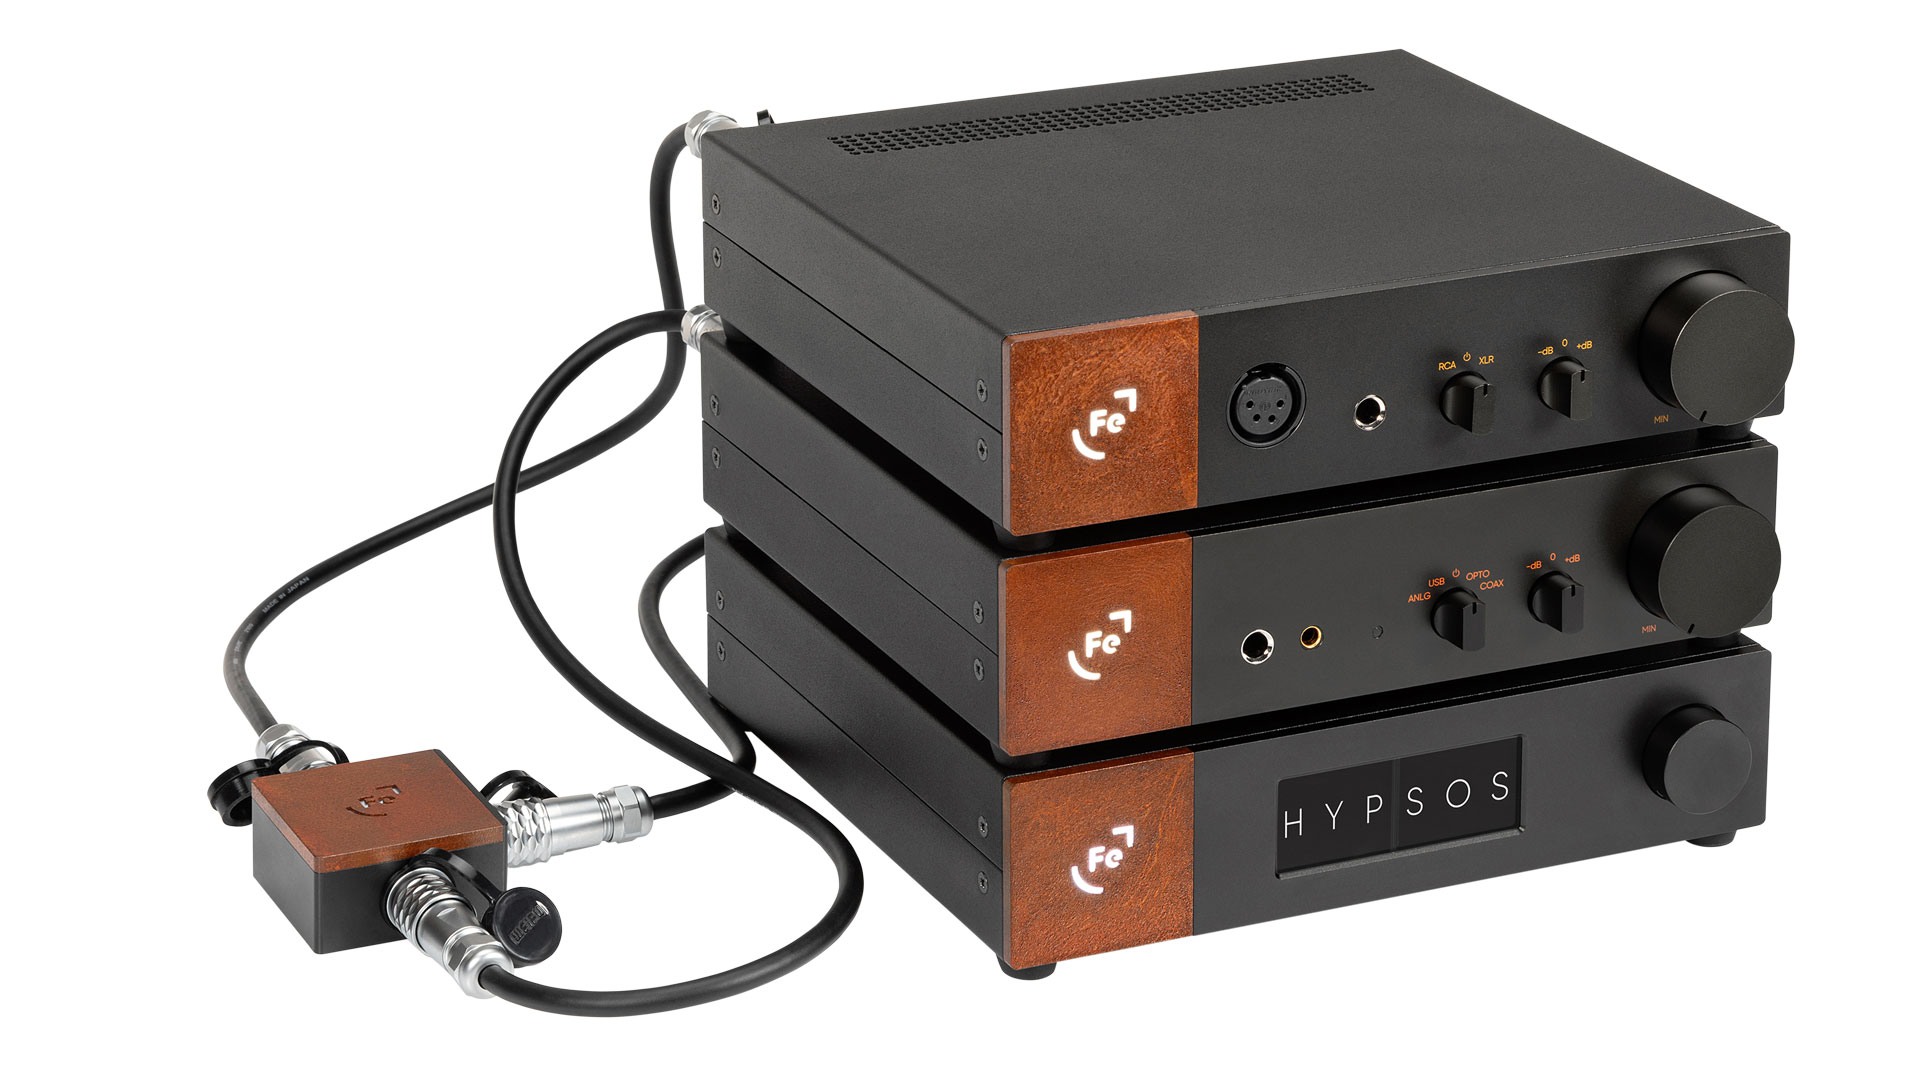 The Ferrum Power Splitter (left) on the PSU Hypsos (lowest) and two other devices. (Image Credit: Ferrum)